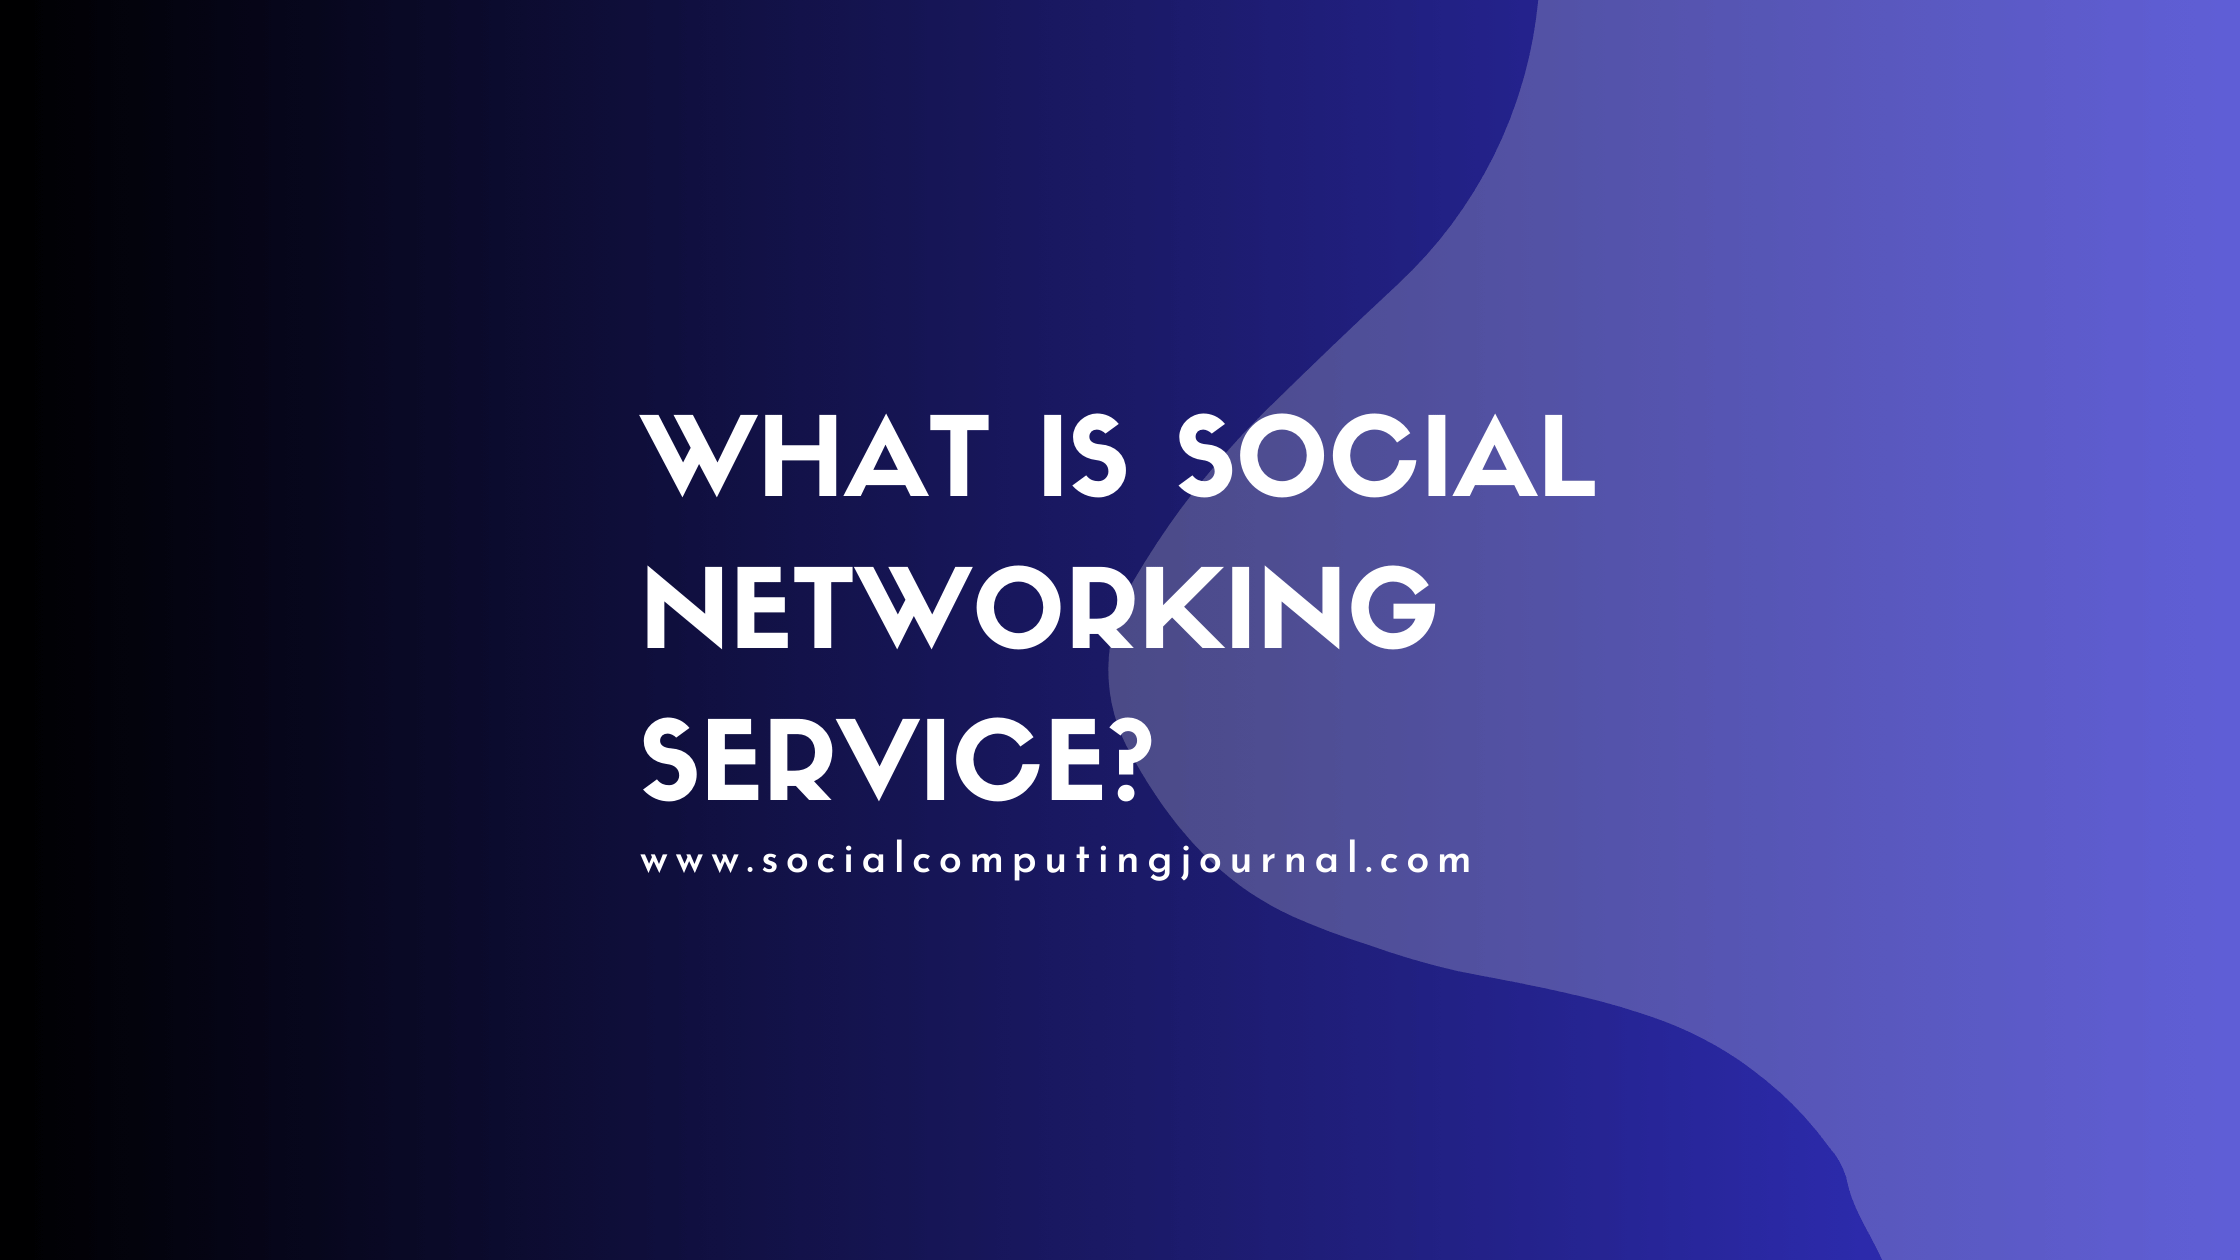 What is Social Networking Service